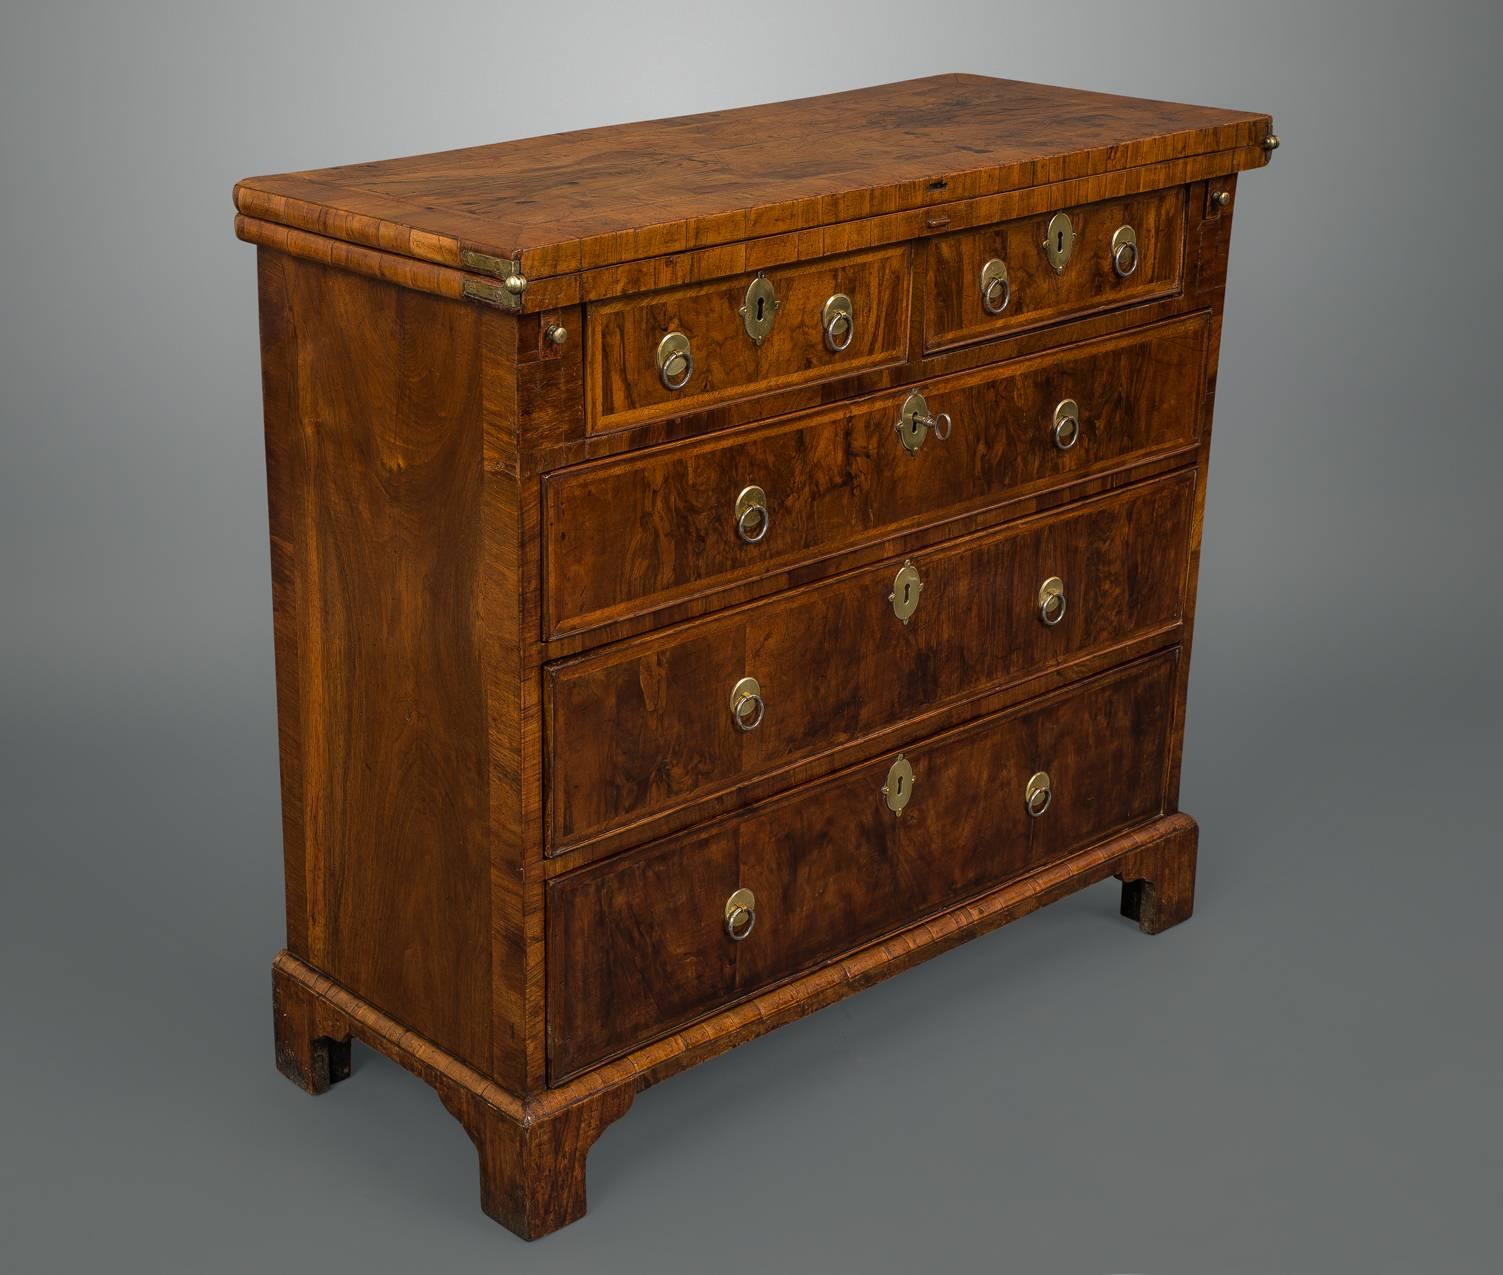 A fine walnut bachelors chest on bracket feet with a wonderful pale toffee color and the added benefit of original ring button handles, escutcheons, locks and hinges.

The top quarter veneered with feather and crossbanding exhibiting many historic